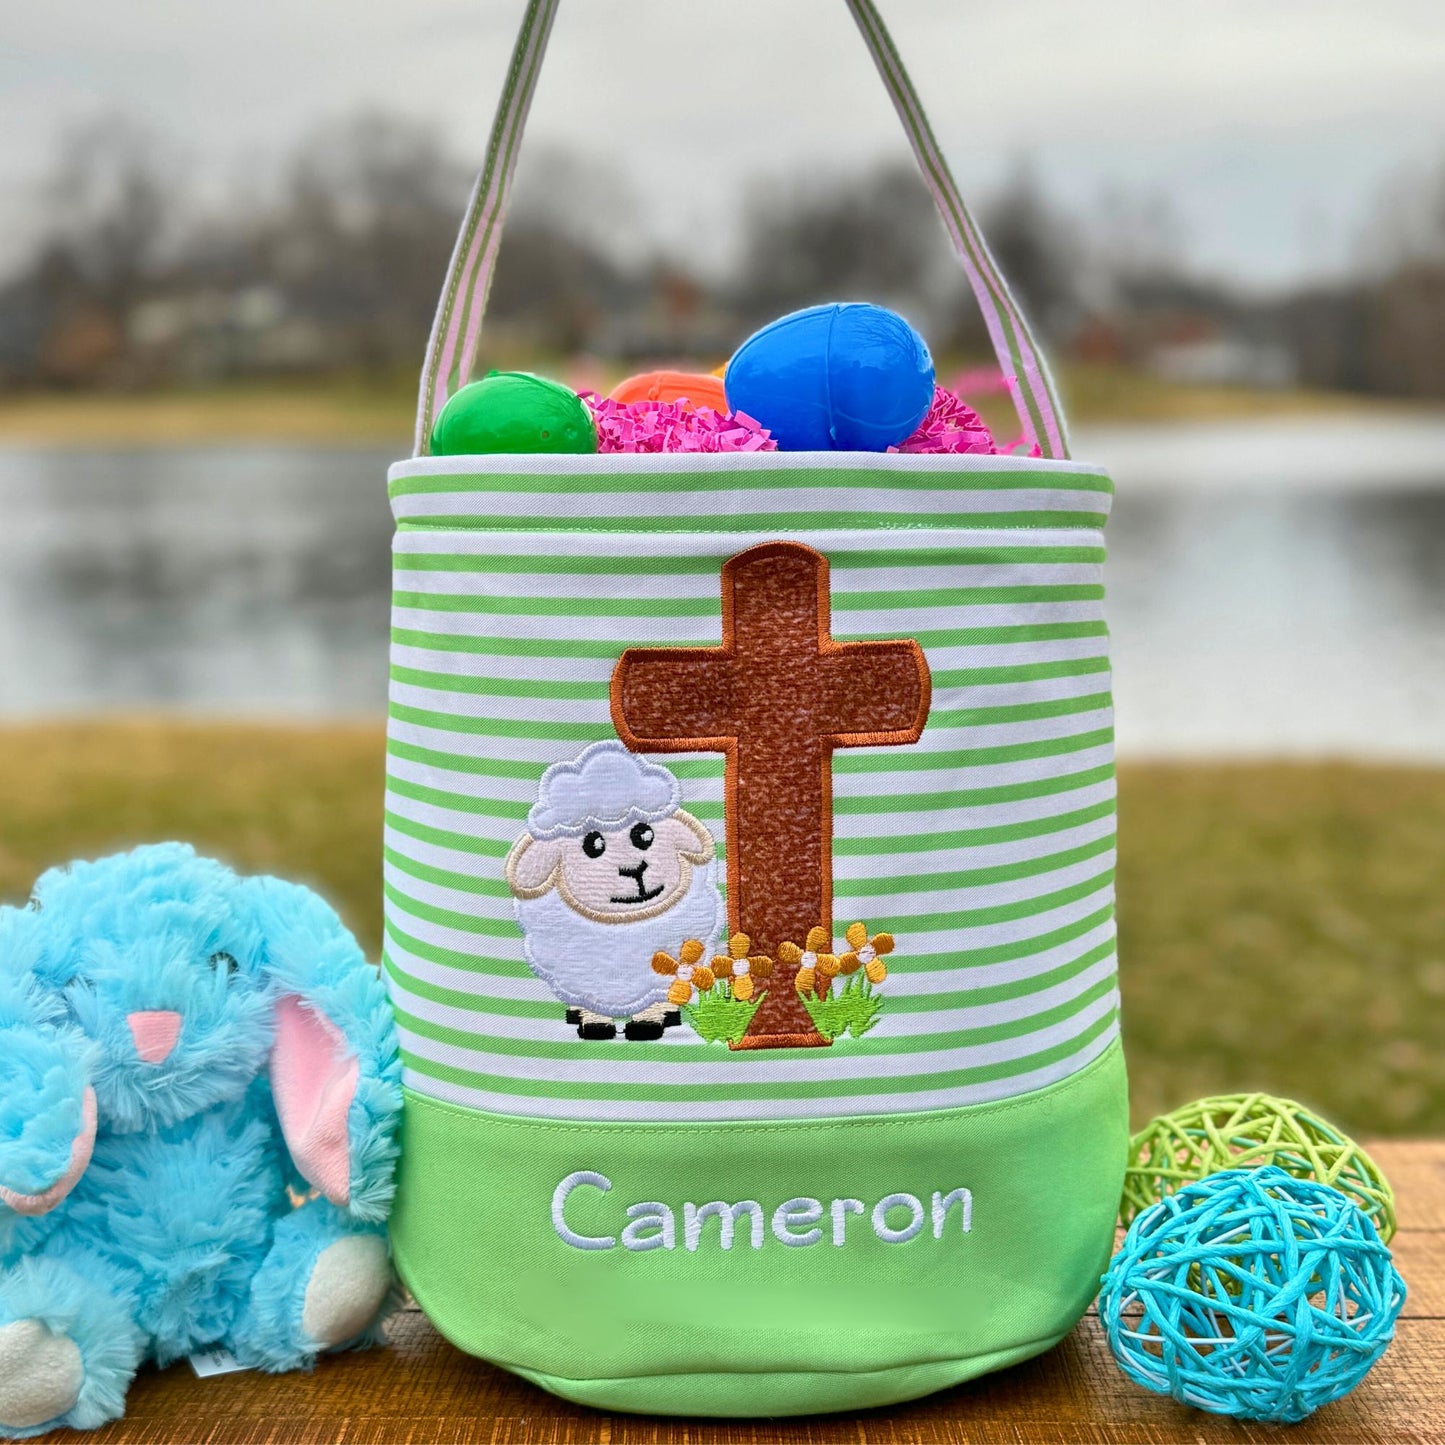 Personalized Embroidered Easter Basket with Adorable Custom Design Bunny Cross Lamb Chick Egg Appliqué Characters Gift for Boy Gift for Girl